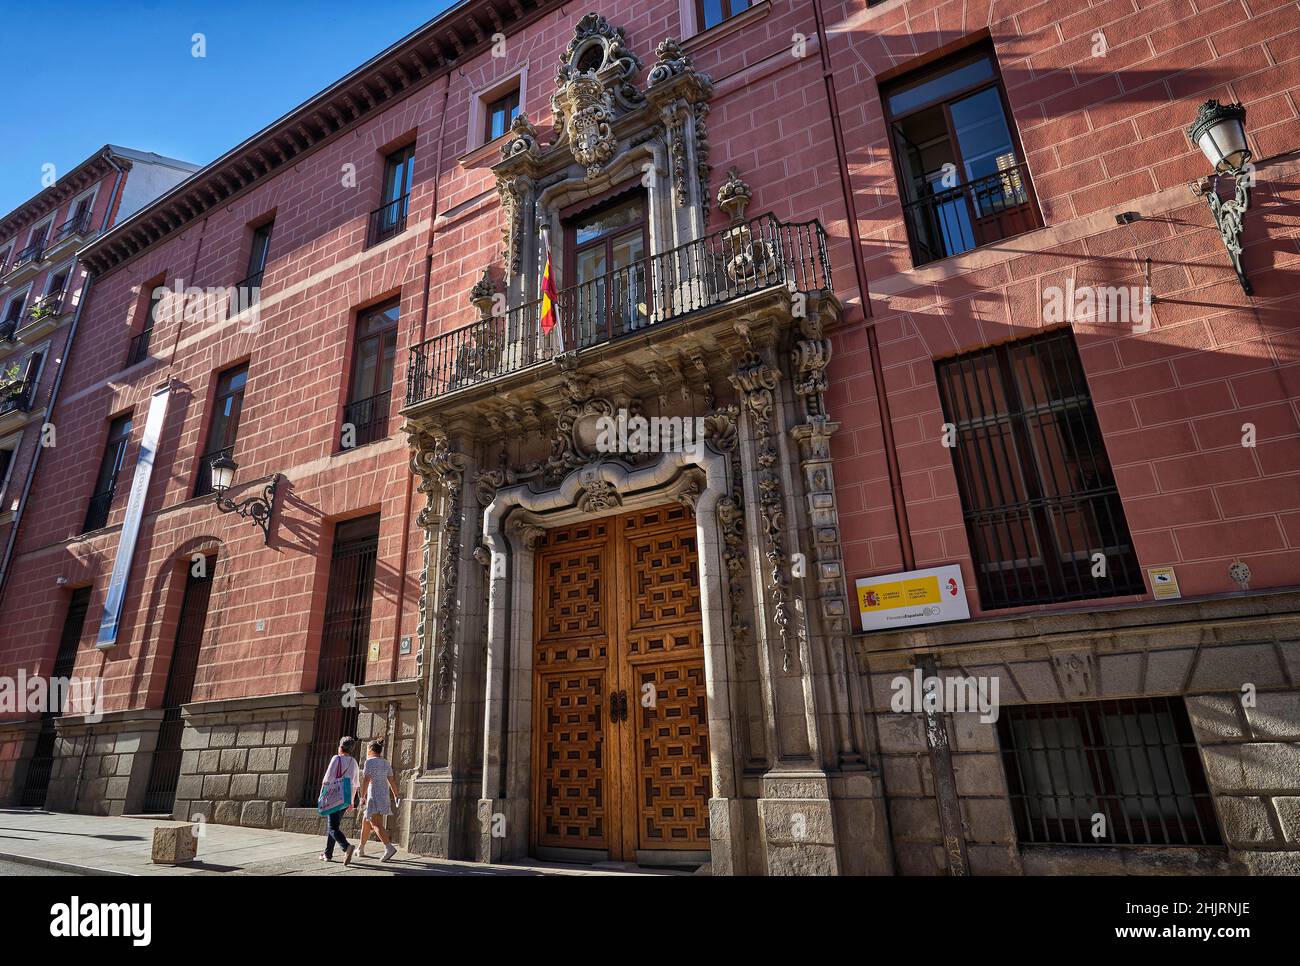 The Spanish National Film Archive headquarters, Filmoteca Española, located at the Marquises of Perales Palace in the district of Lavapies. Madrid. Stock Photo